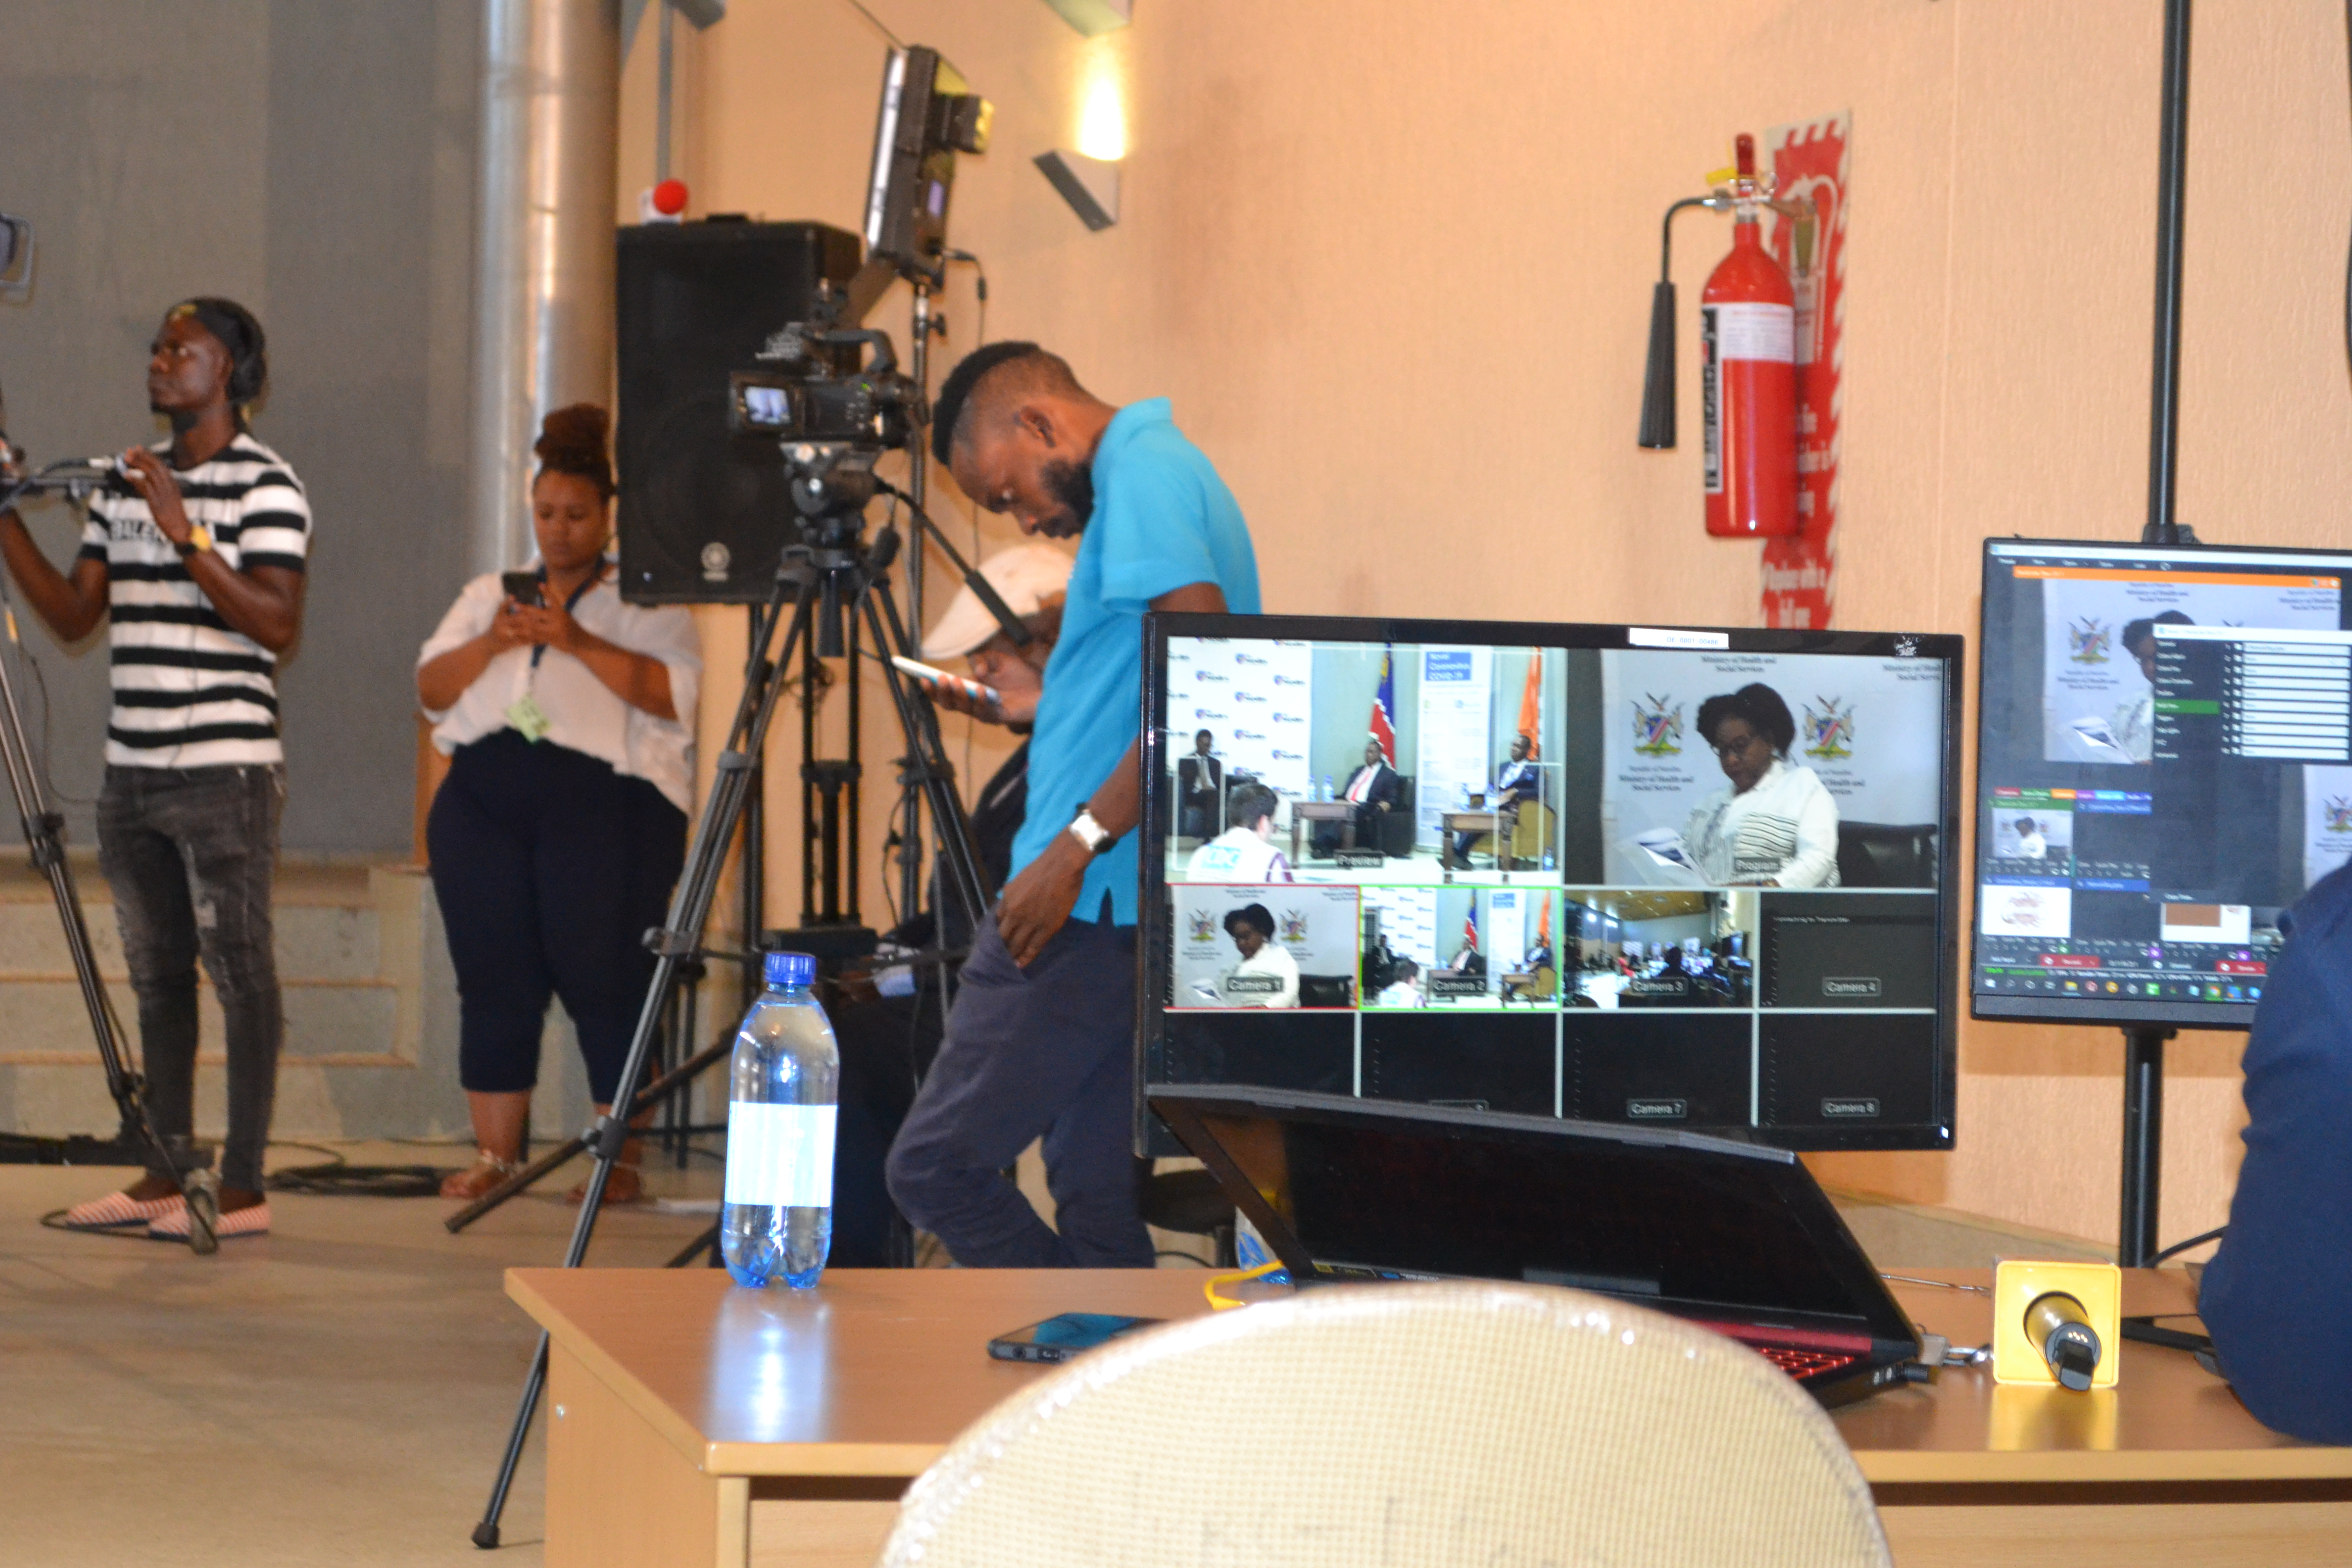 Namibia launched a COVID-19 Communication Centre on 2 April 2020 jointly managed by the Ministry of Health and Social Services and the Ministry of Information, Communication and Technology. The Center host 2 daily live media briefings on COVID-19 involving all sectors. 